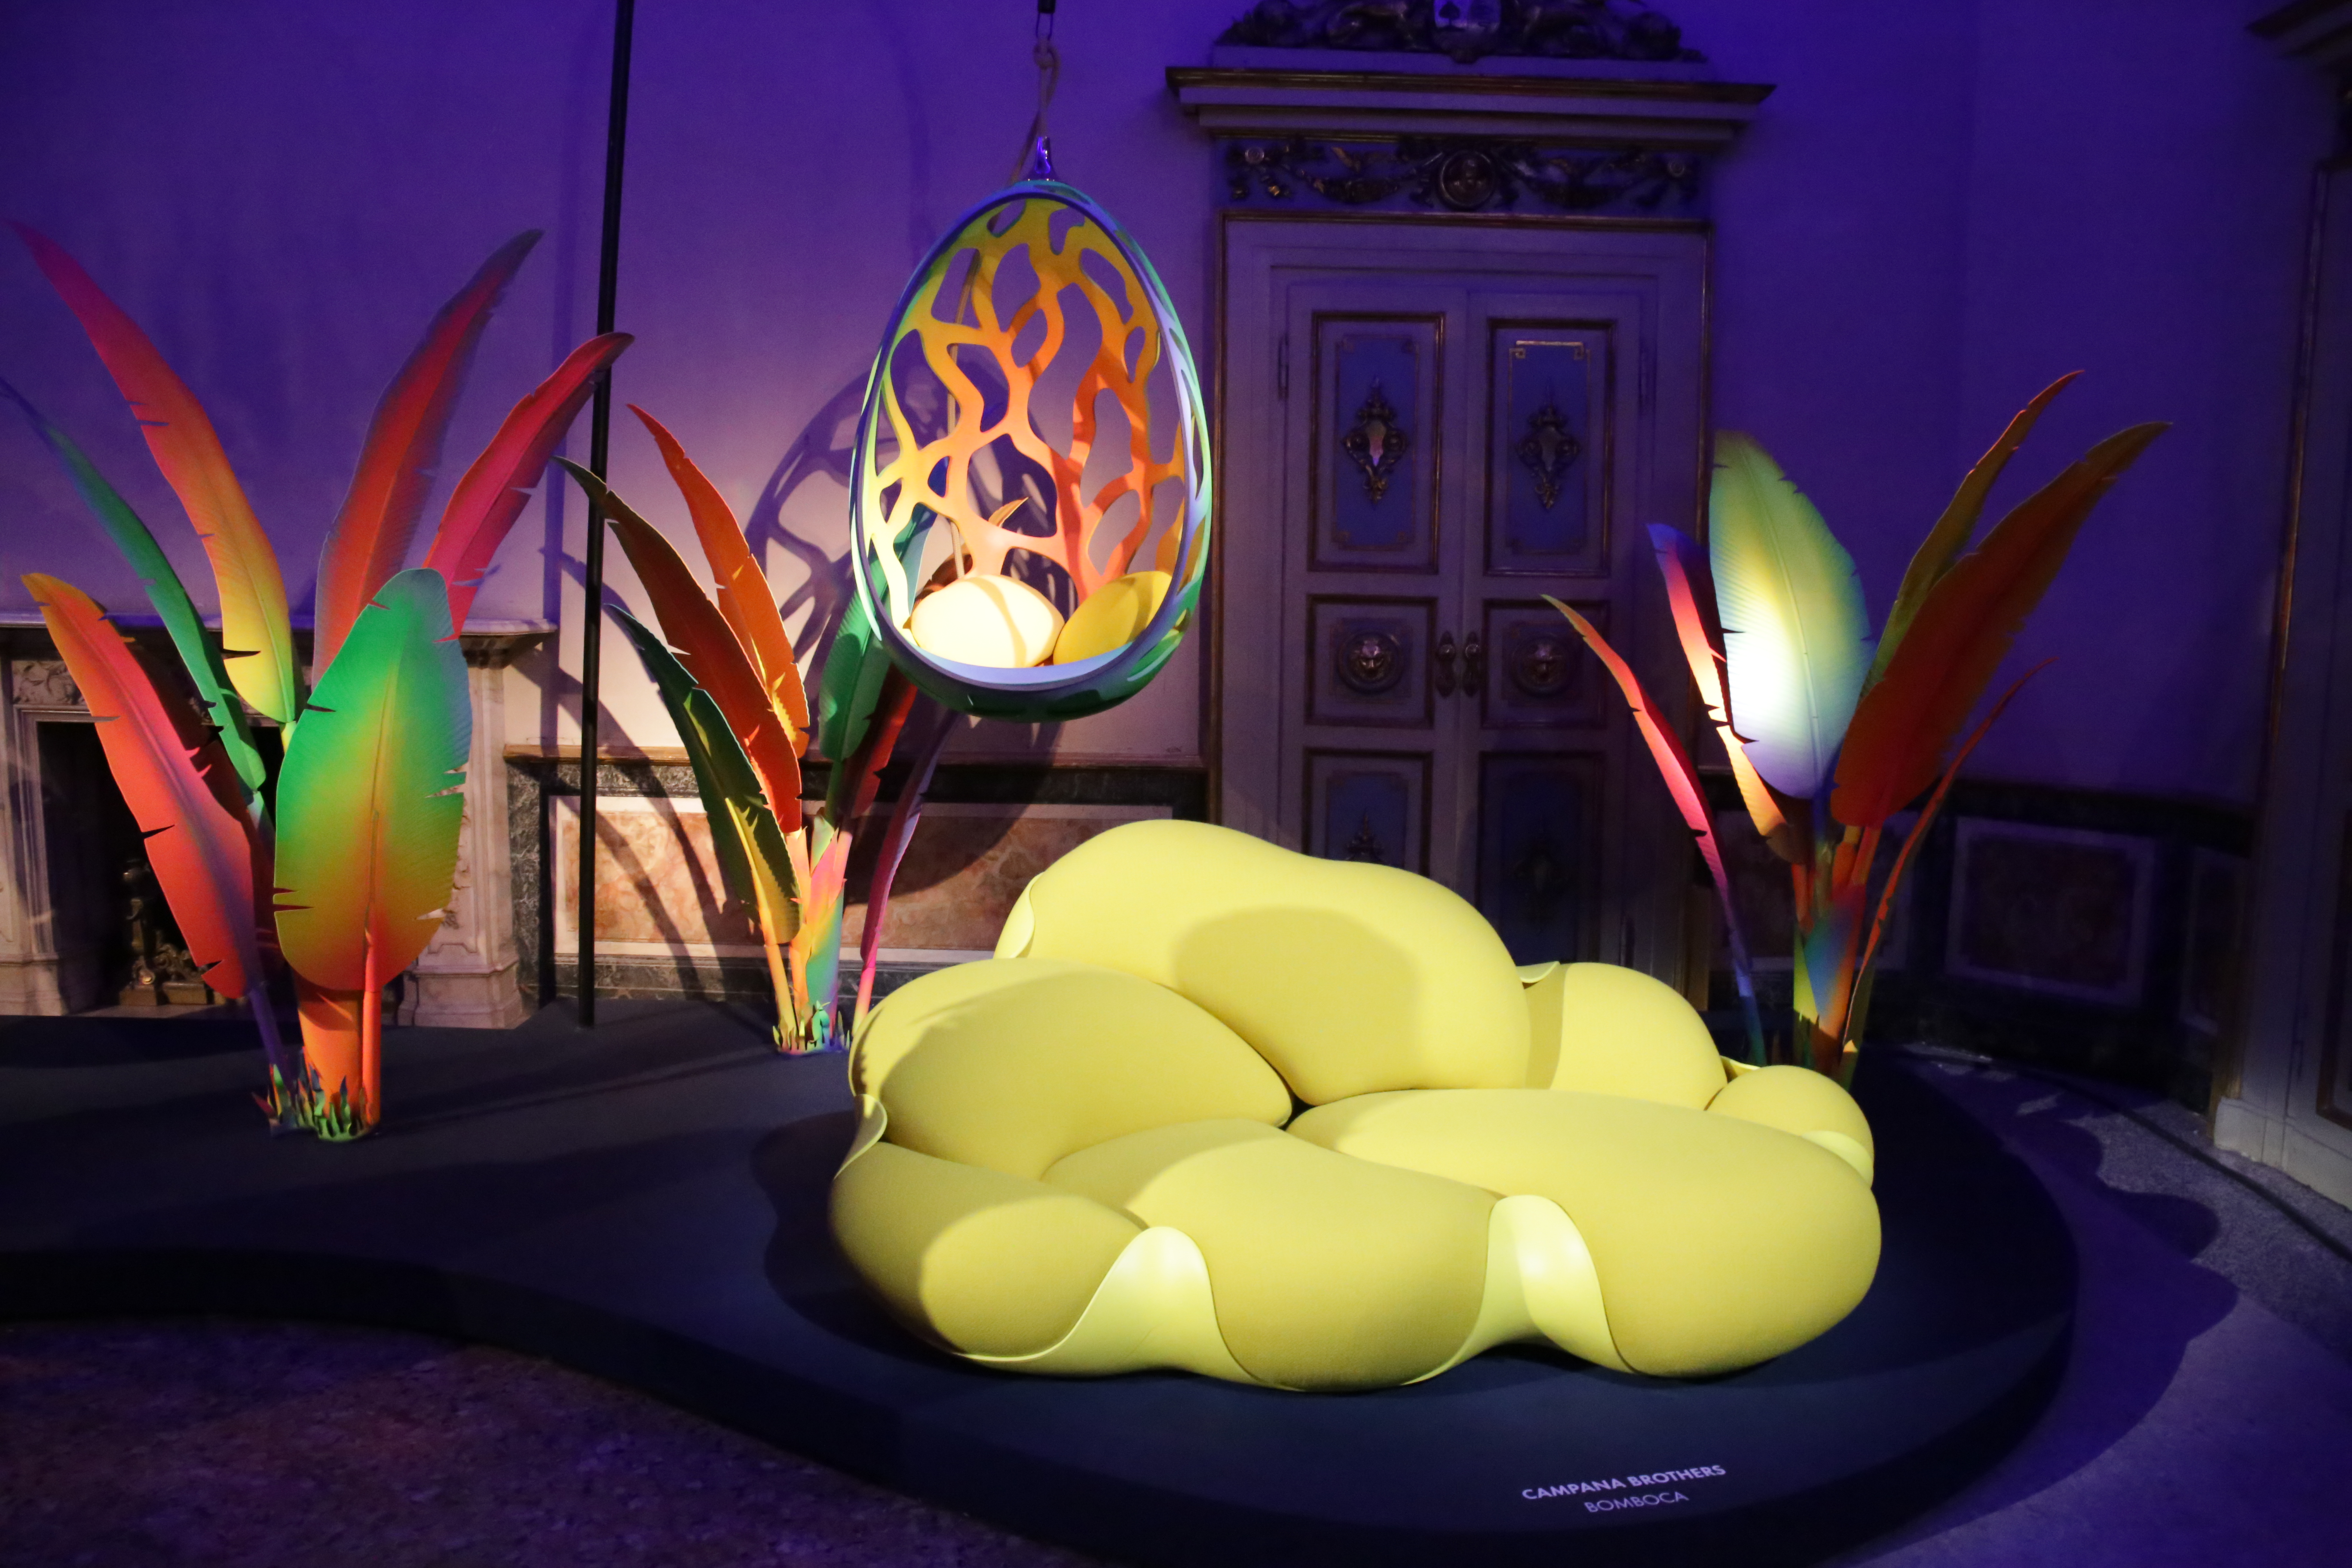 Objets Nomades by Louis Vuitton at Palazzo Serbelloni in Milan